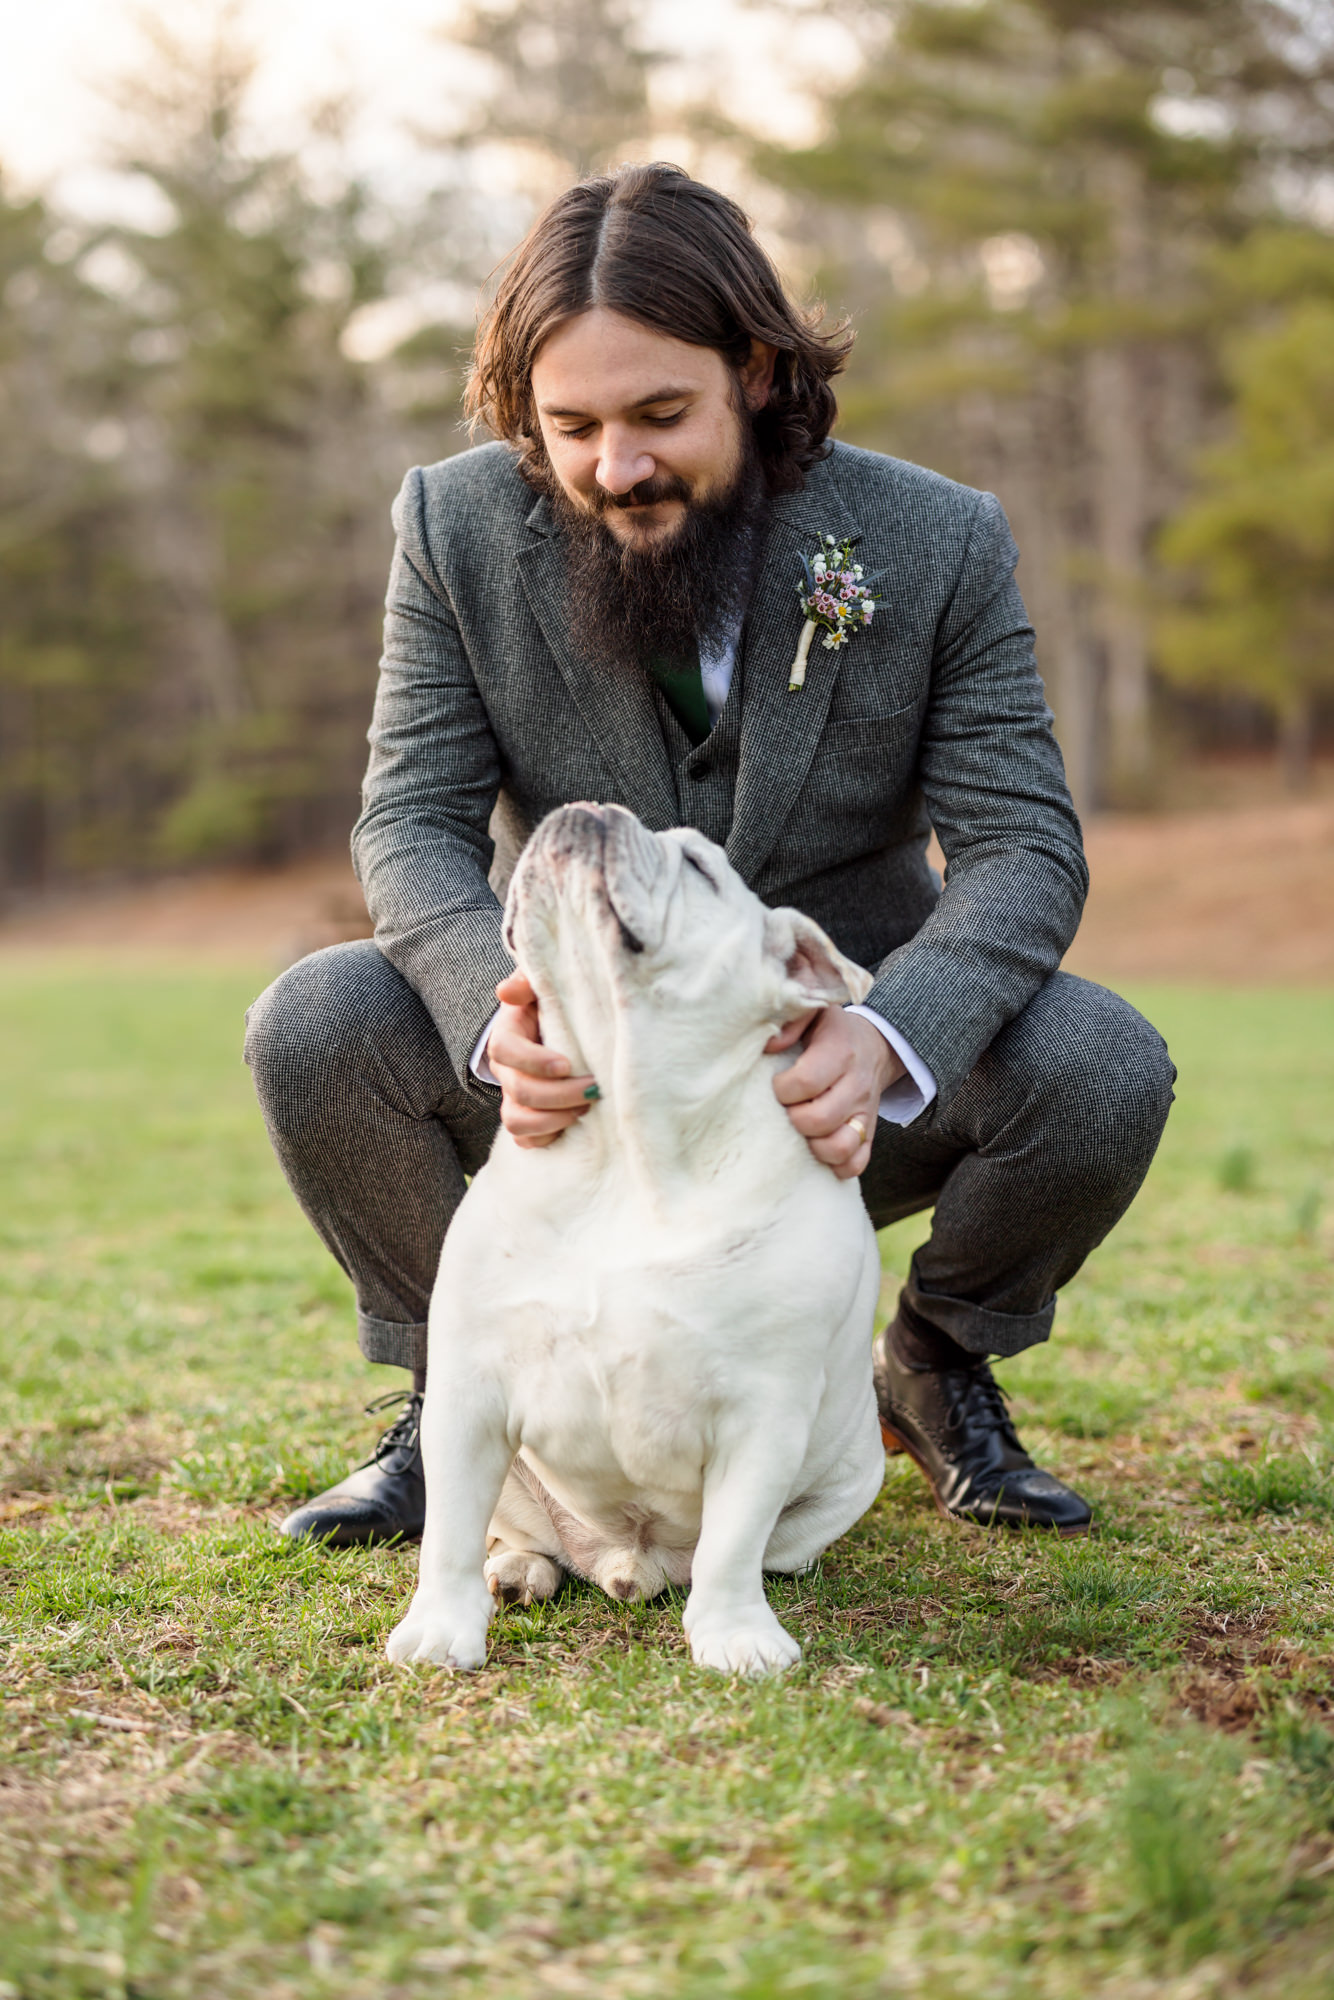 groom on ground holding and petting dog after ceremony